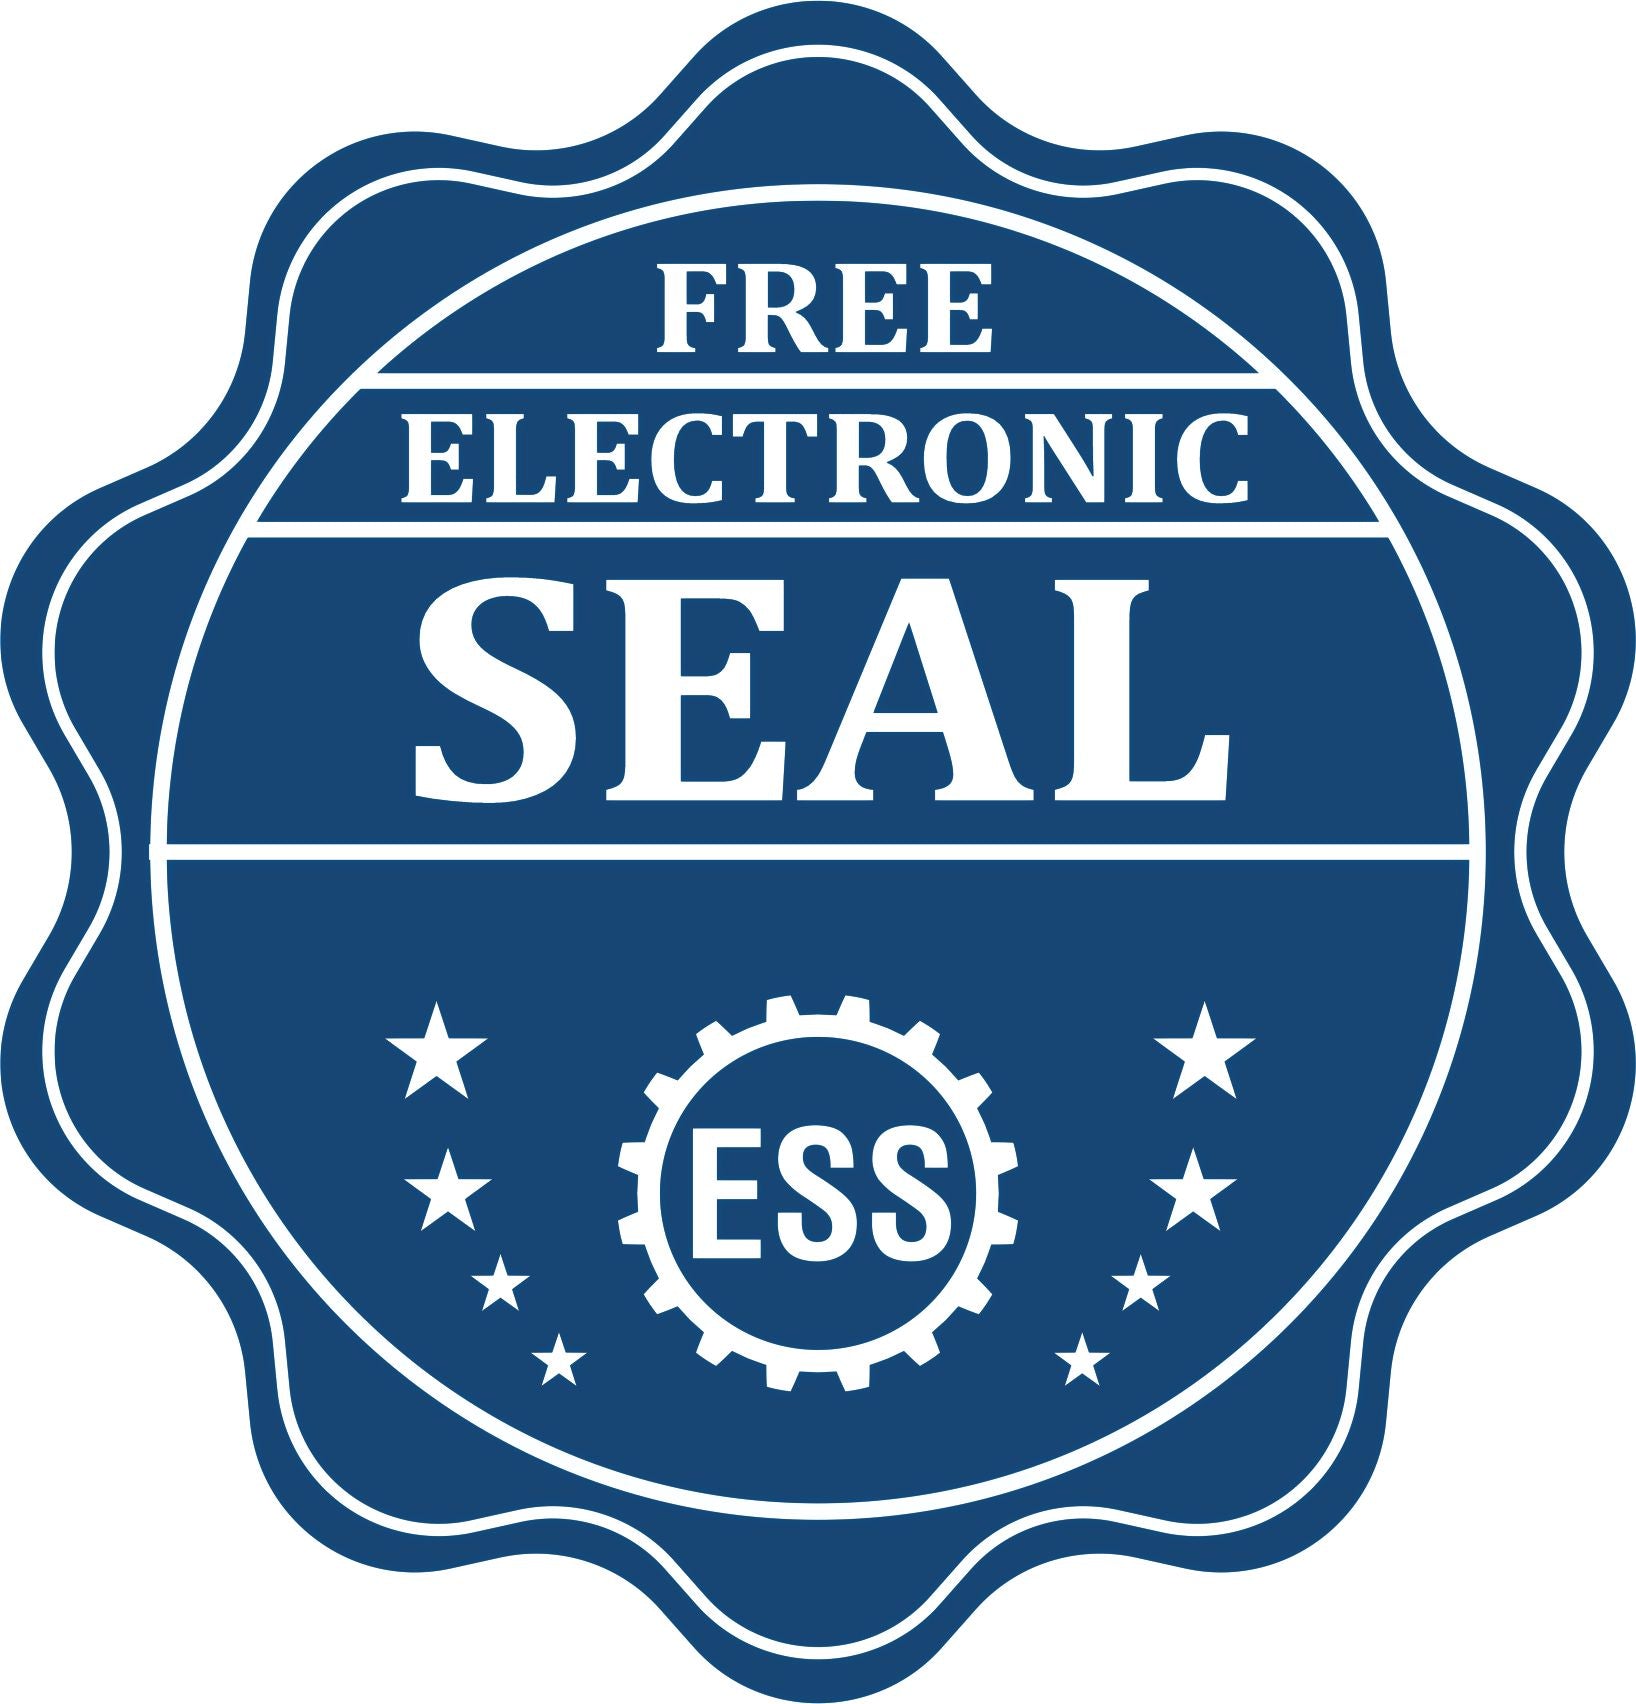 A badge showing a free electronic seal for the Premium MaxLight Pre-Inked West Virginia Geology Stamp with stars and the ESS gear on the emblem.